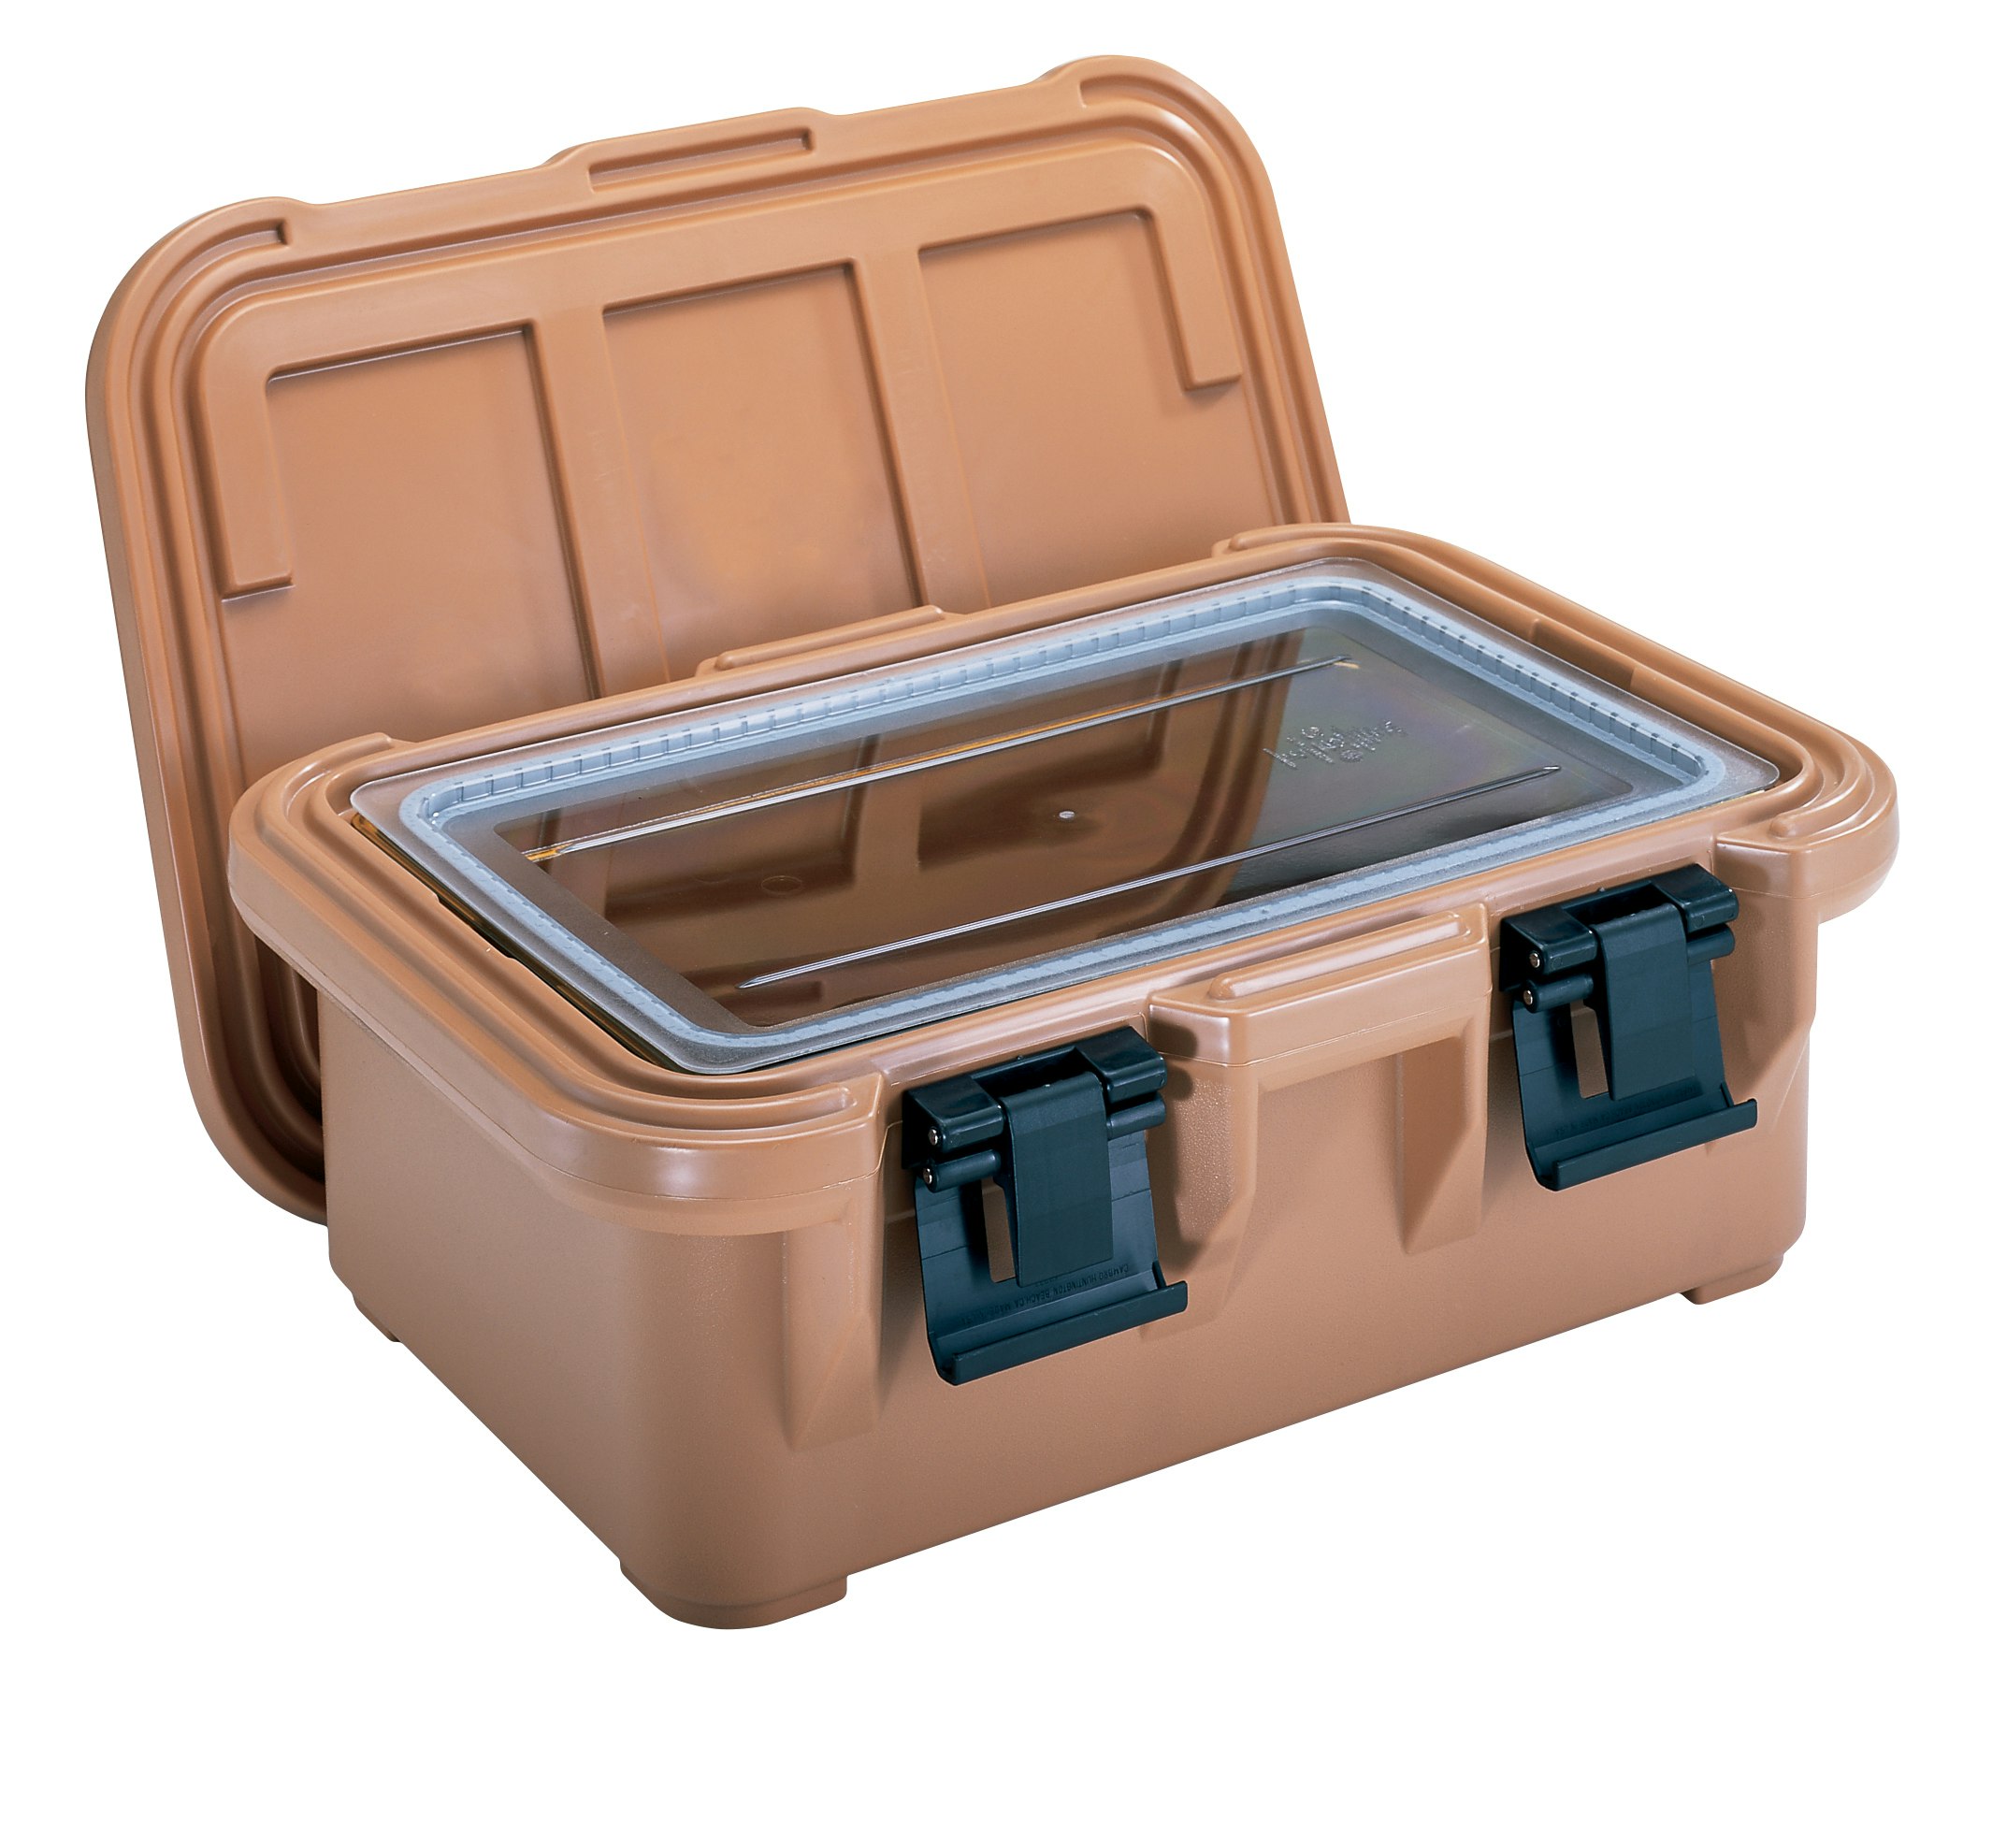 Cambro UPC1600SP110 - Food Pan Carrier, Front Loading, CAPA